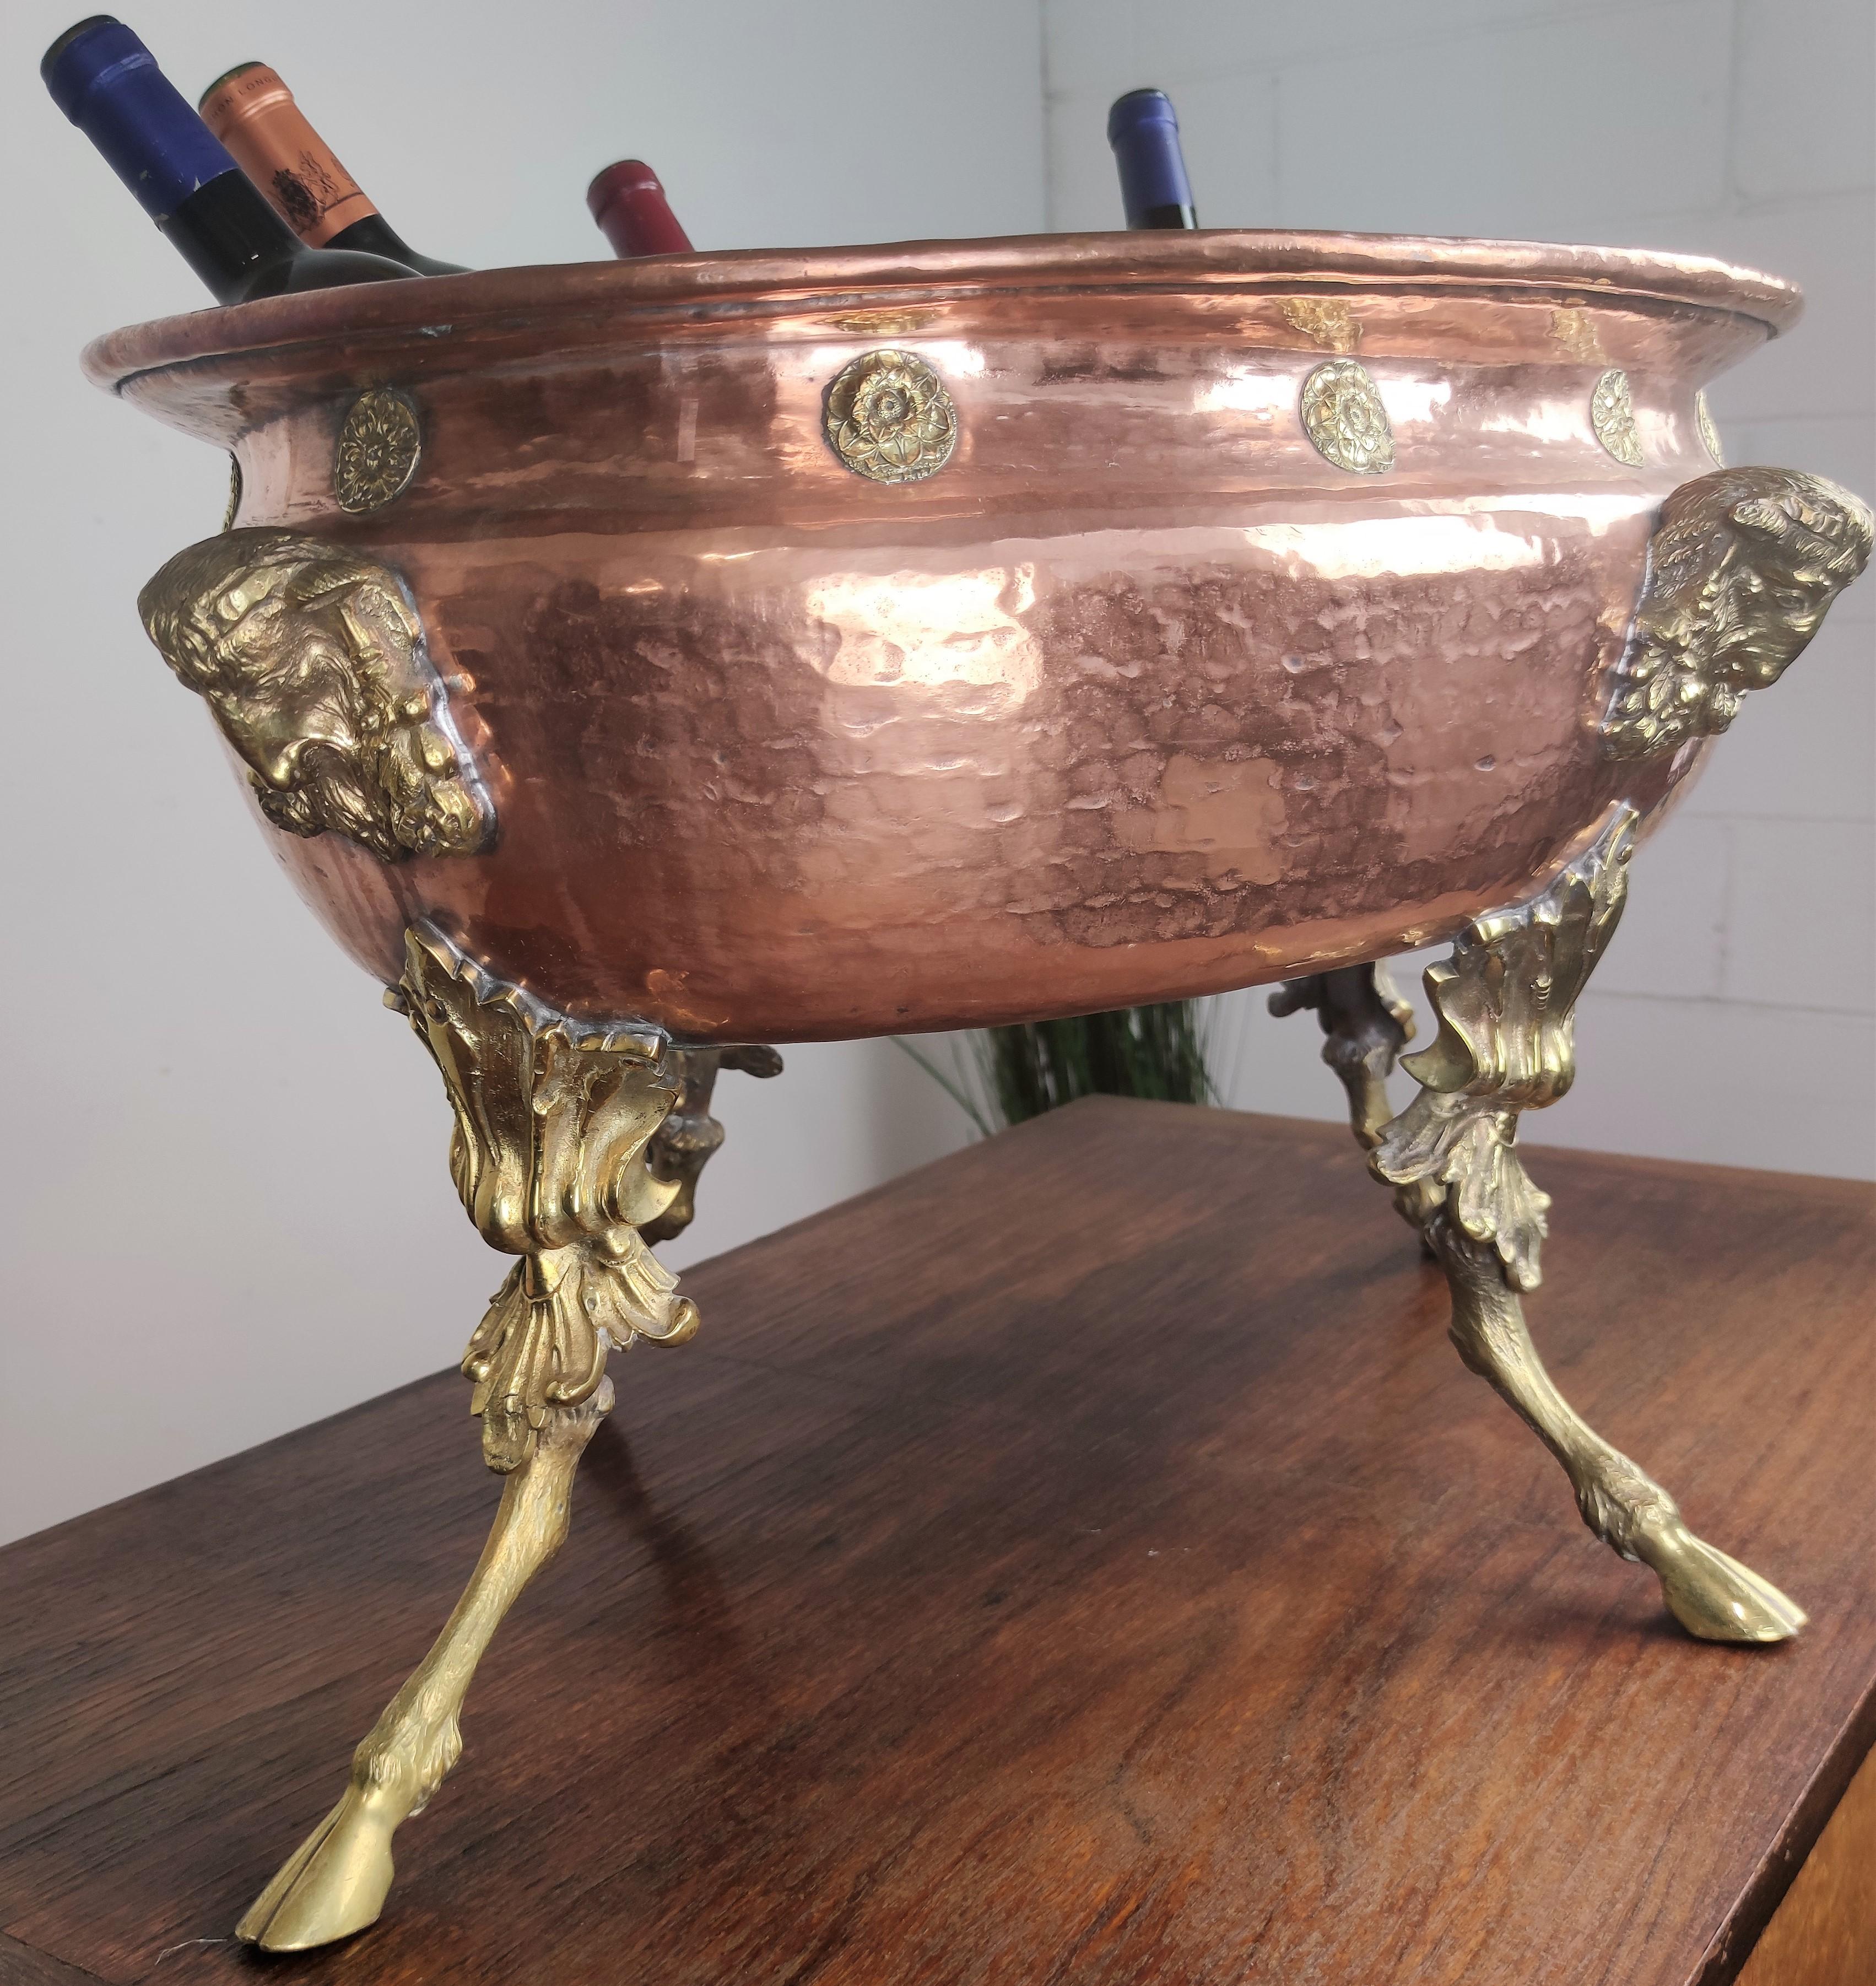 Baroque 18th Century Italian Huge Party Brass Copper Champagne Wine Cooler Ice Holder